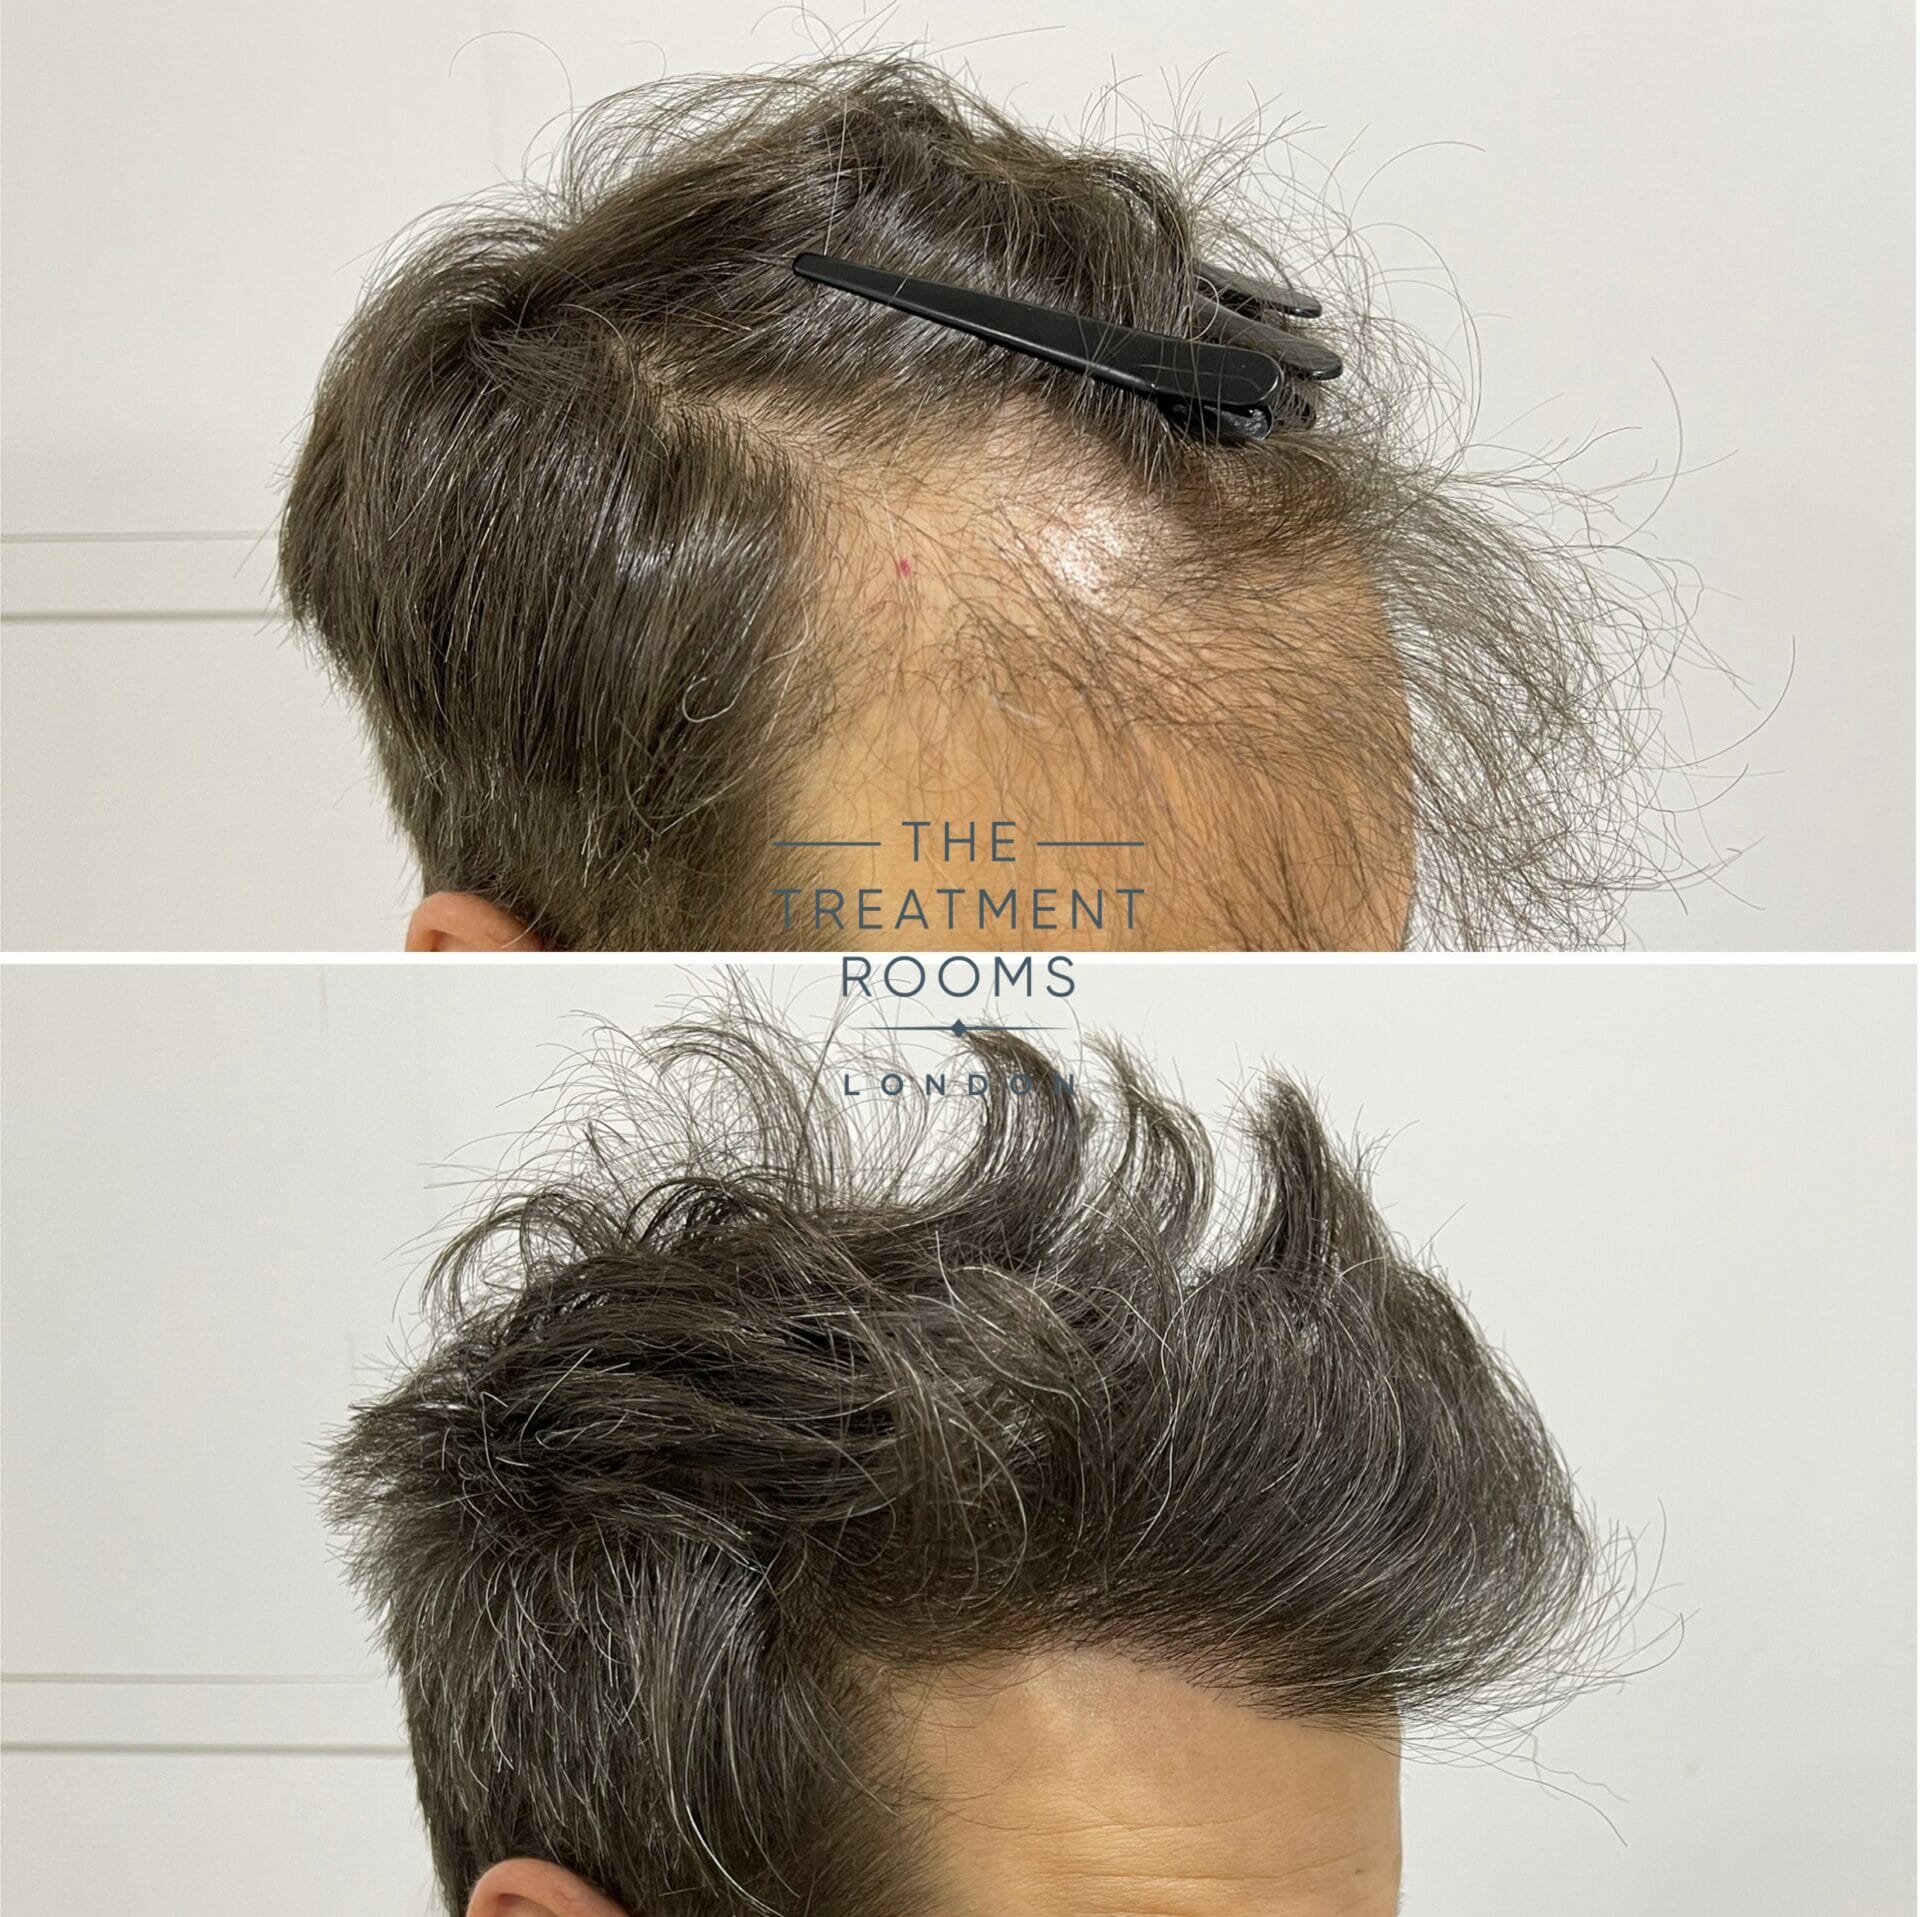 Can You Reverse A Hair Transplant? | Treatment Rooms London